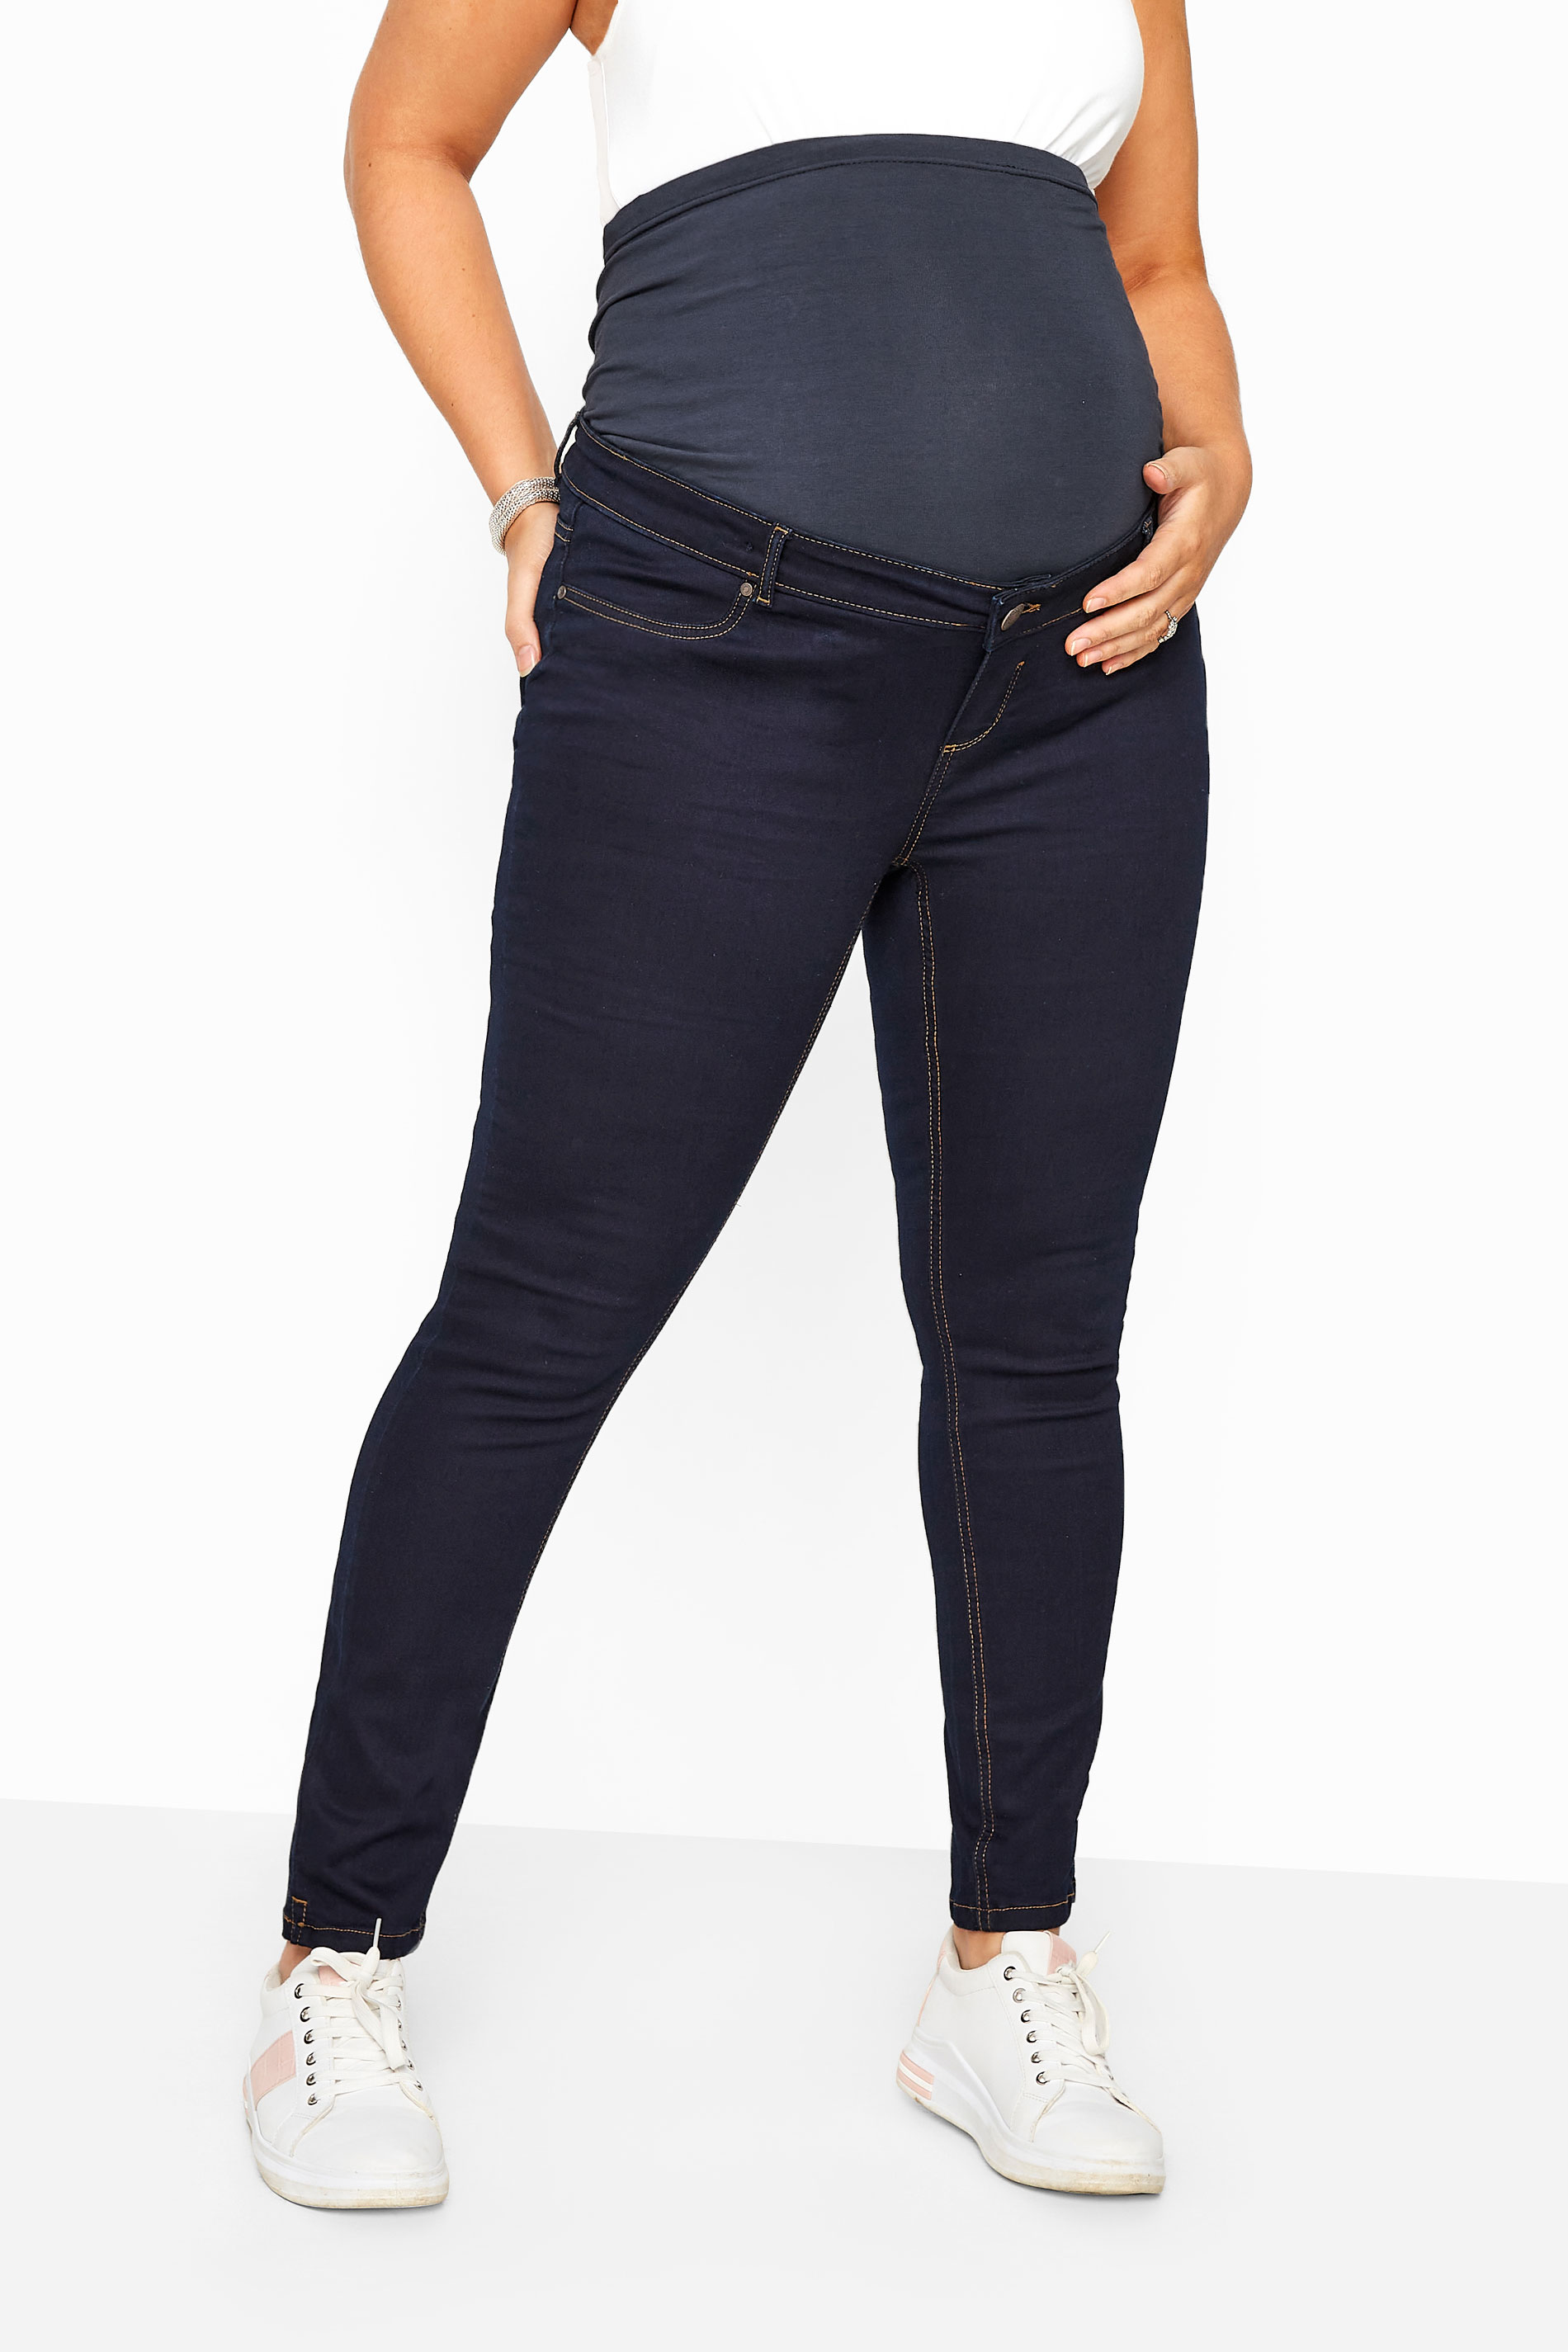 BUMP IT UP MATERNITY Indigo Blue Skinny Jeans With Comfort Panel | Yours Clothing 1